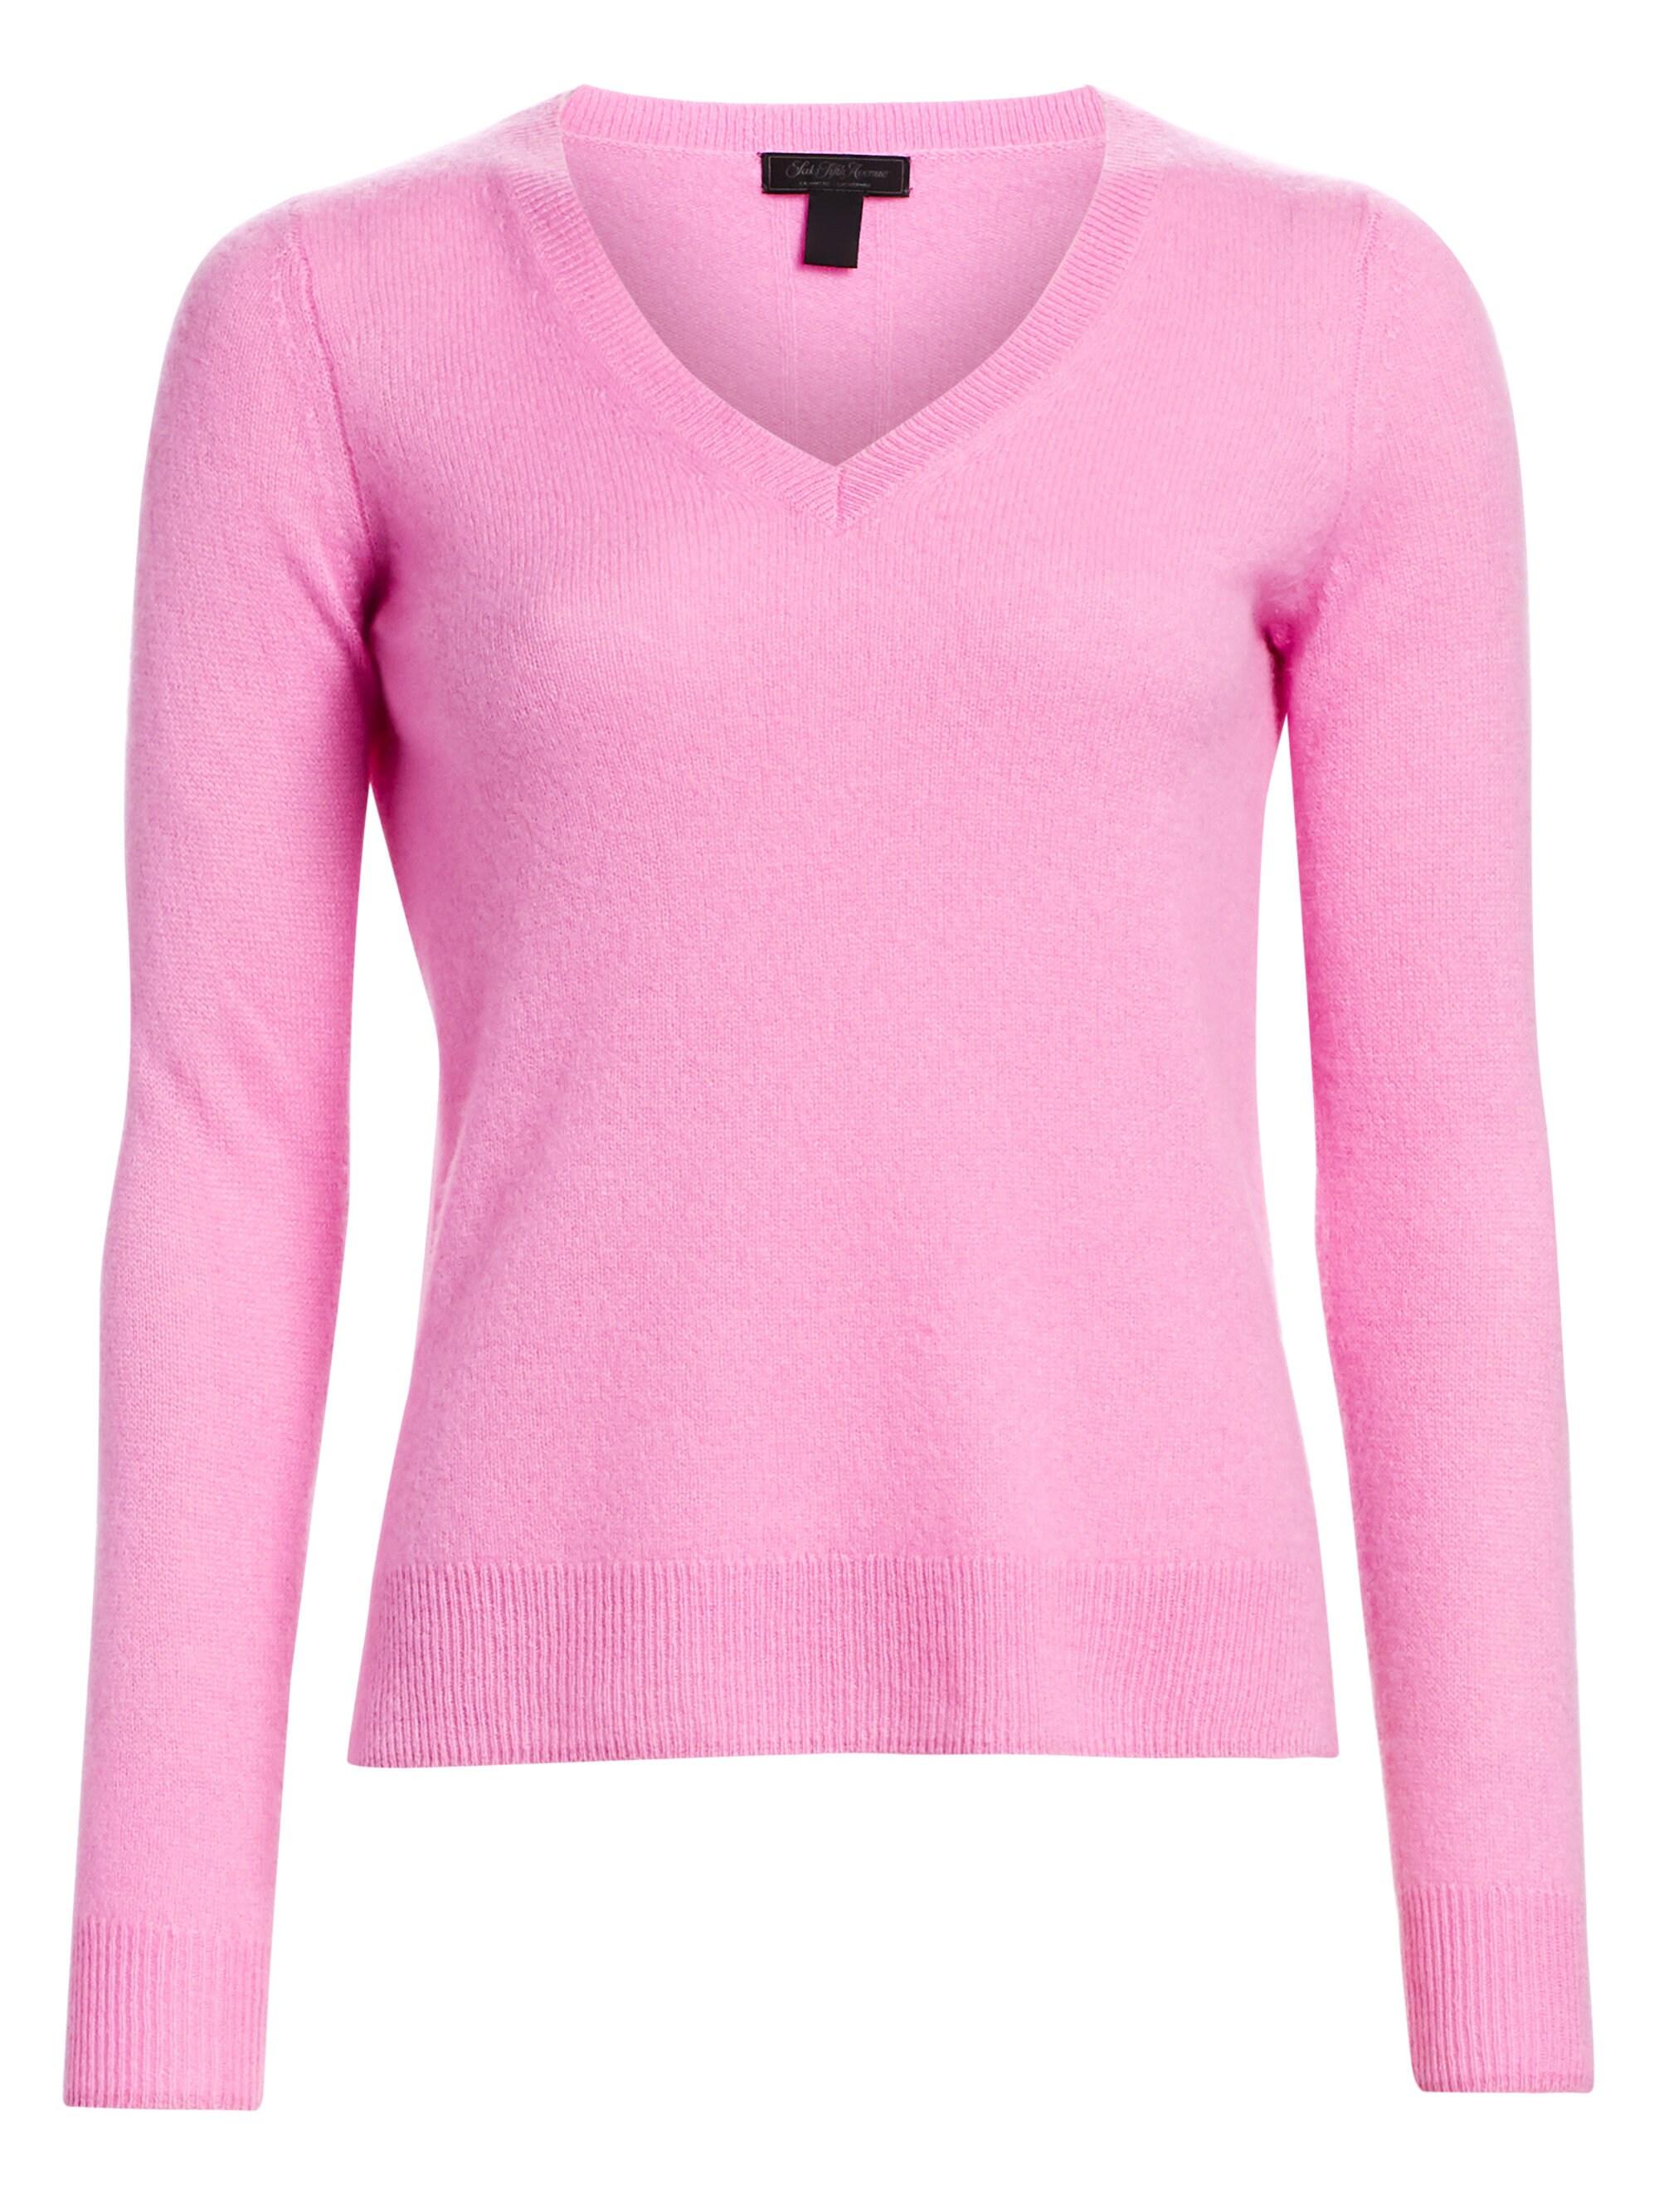 Saks Fifth Avenue Collection Featherweight Cashmere V-neck Sweater in